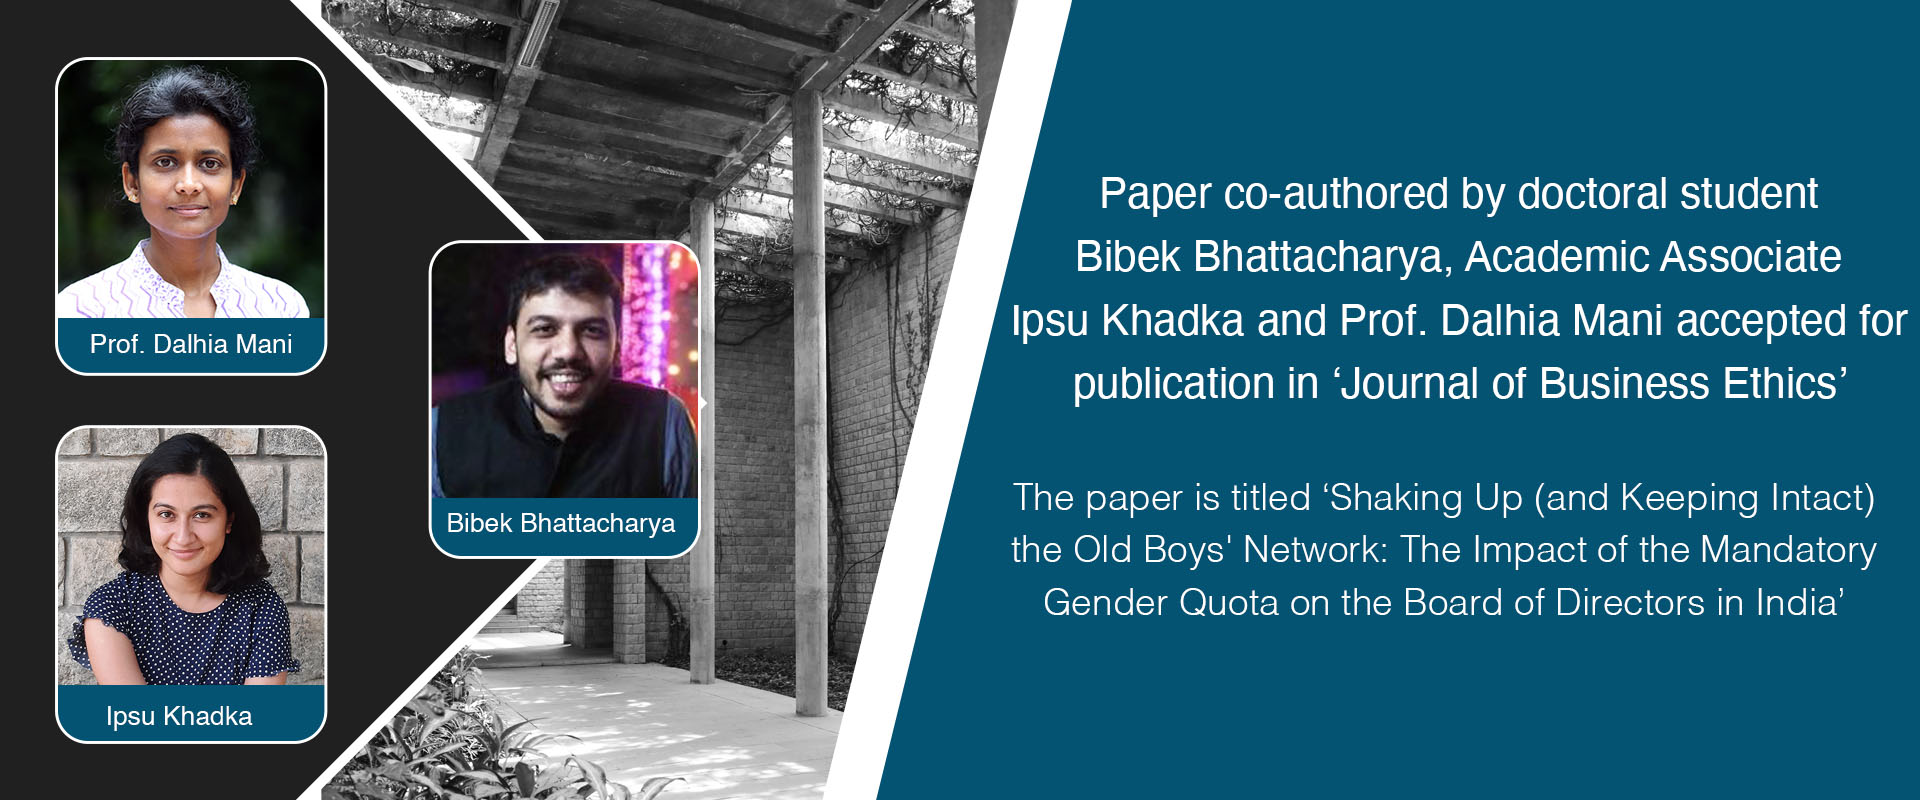 Paper co-authored by doctoral student Bibek Bhattacharya, Academic Associate Ipsu Khadka and Prof. Dalhia Mani accepted for publication in ‘Journal of Business Ethics’